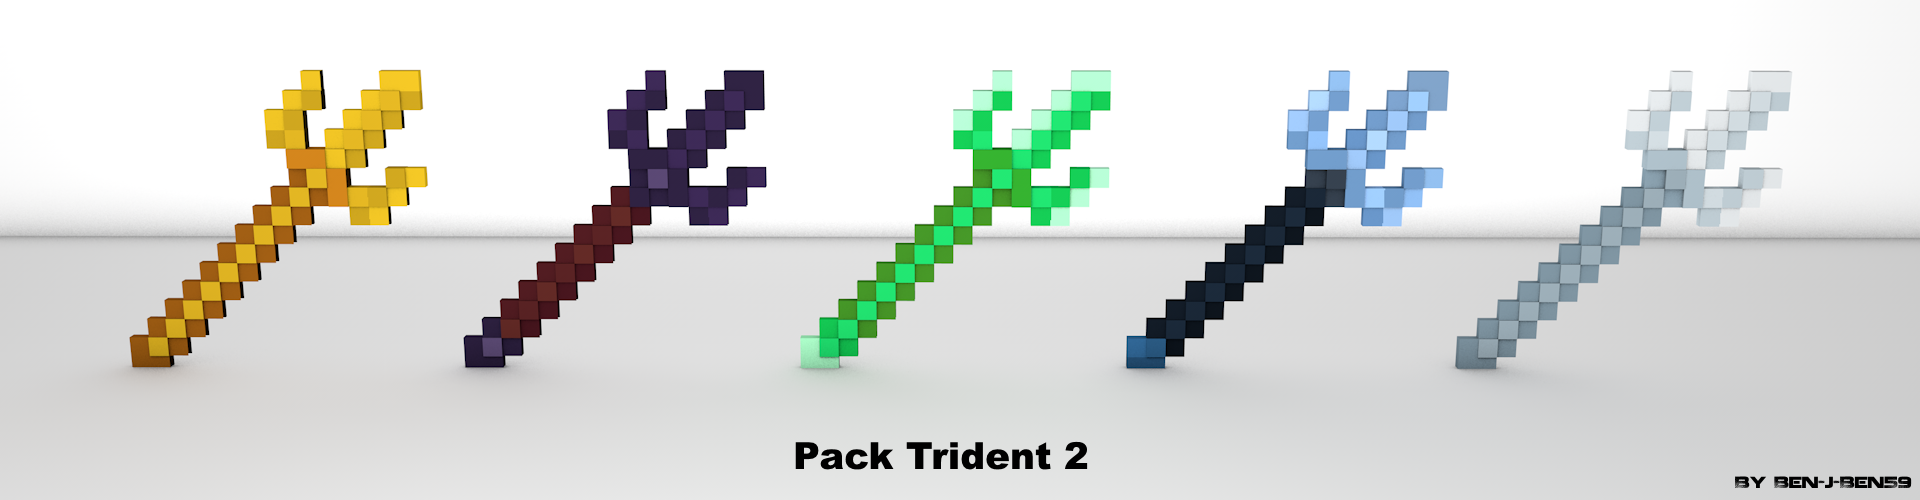 Pack Trident 2.png